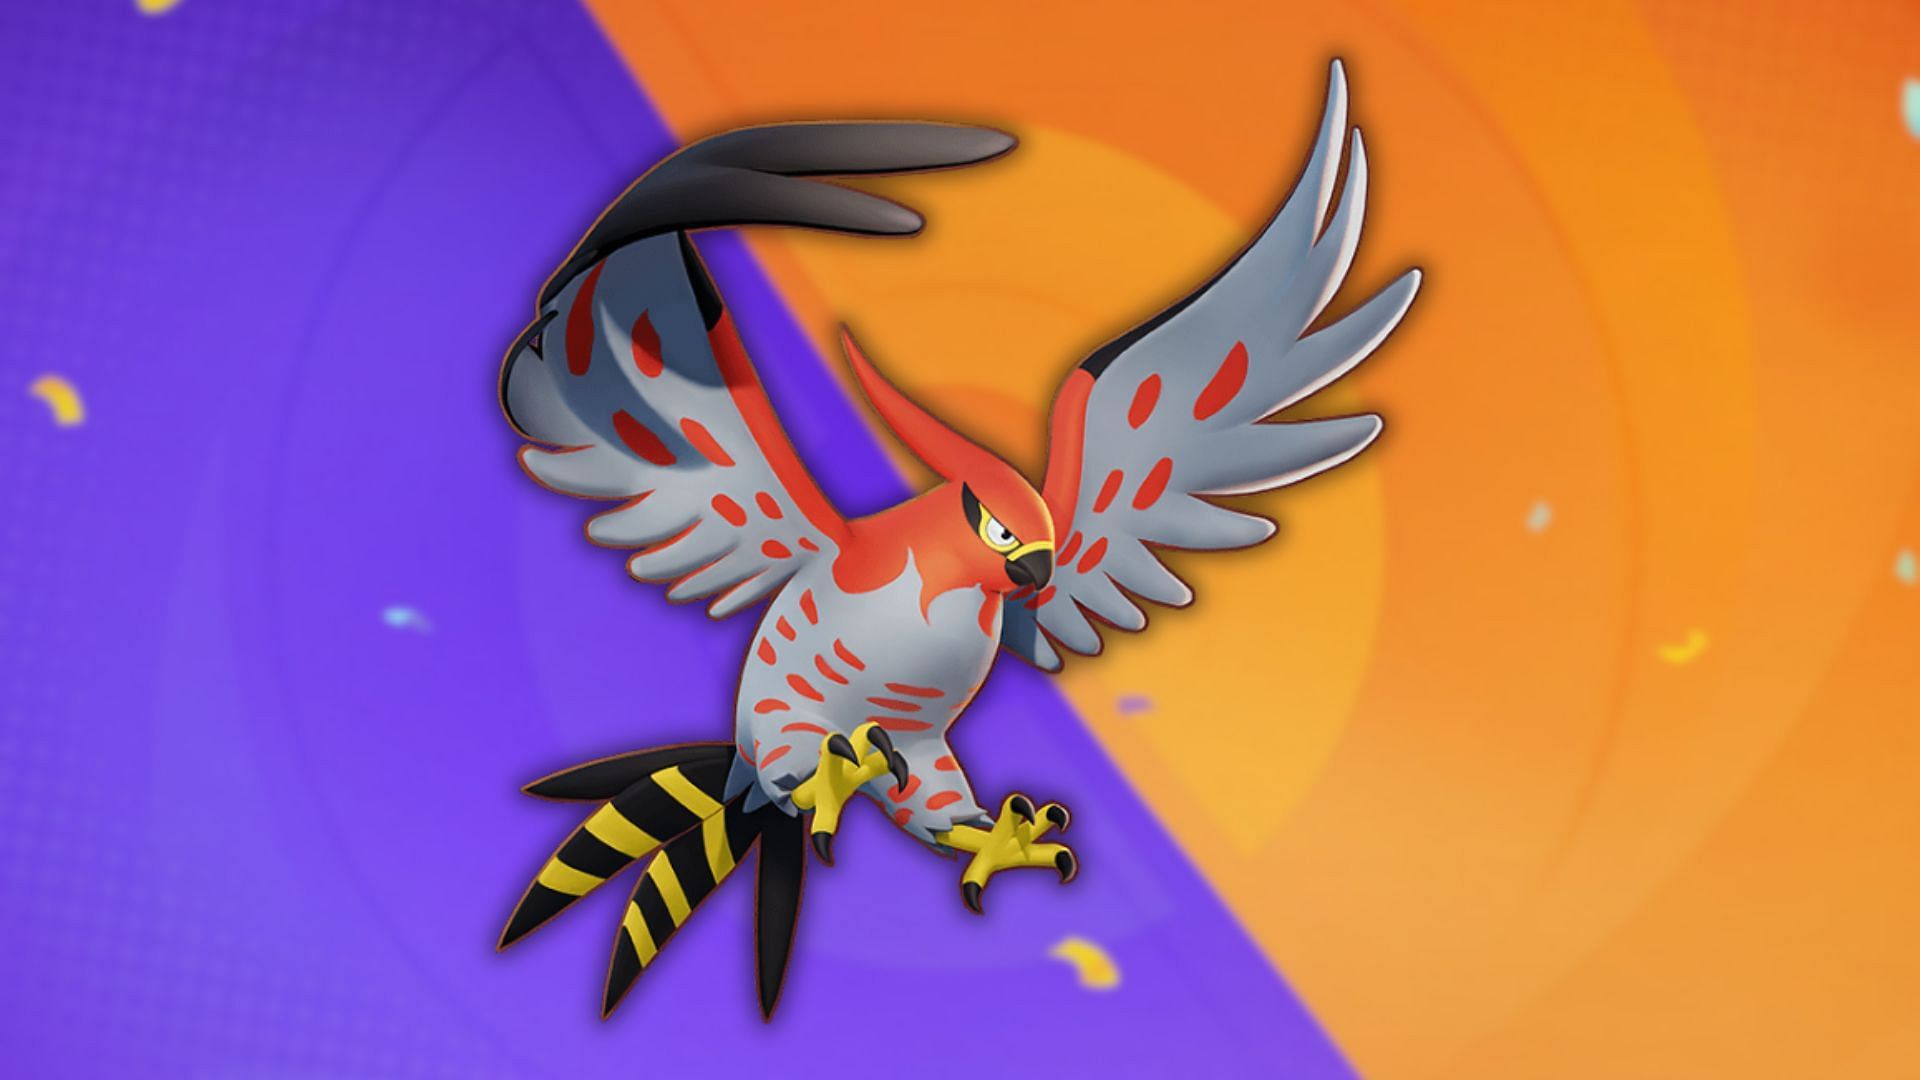 Talonflame in the game (Image via The Pokemon Company)